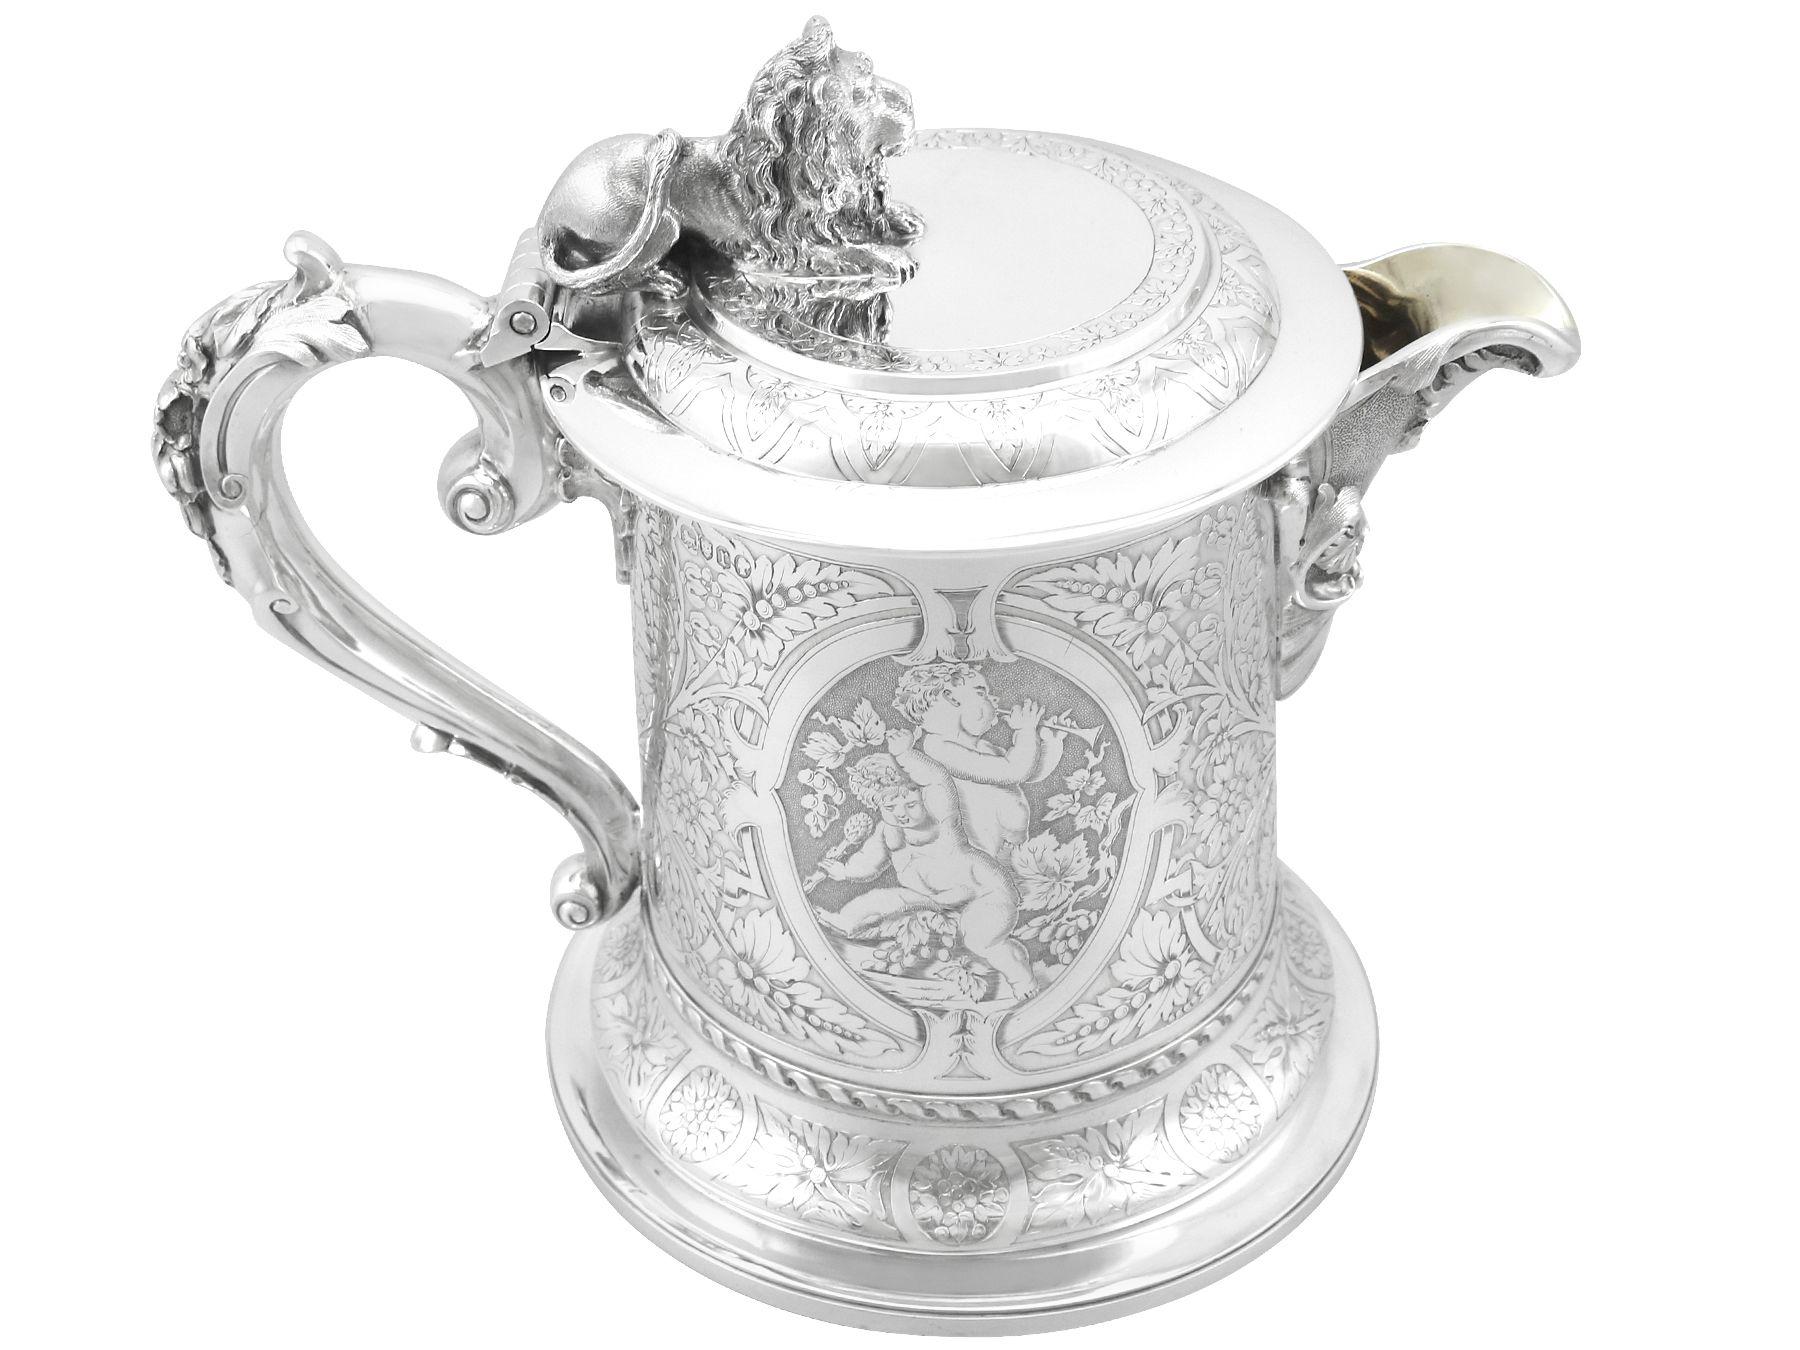 A magnificent, fine and impressive antique Victorian English sterling silver lidded jug; part of our wine and drinks related silverware collection.

This magnificent antique Victorian English sterling silver jug has a plain tapering cylindrical form